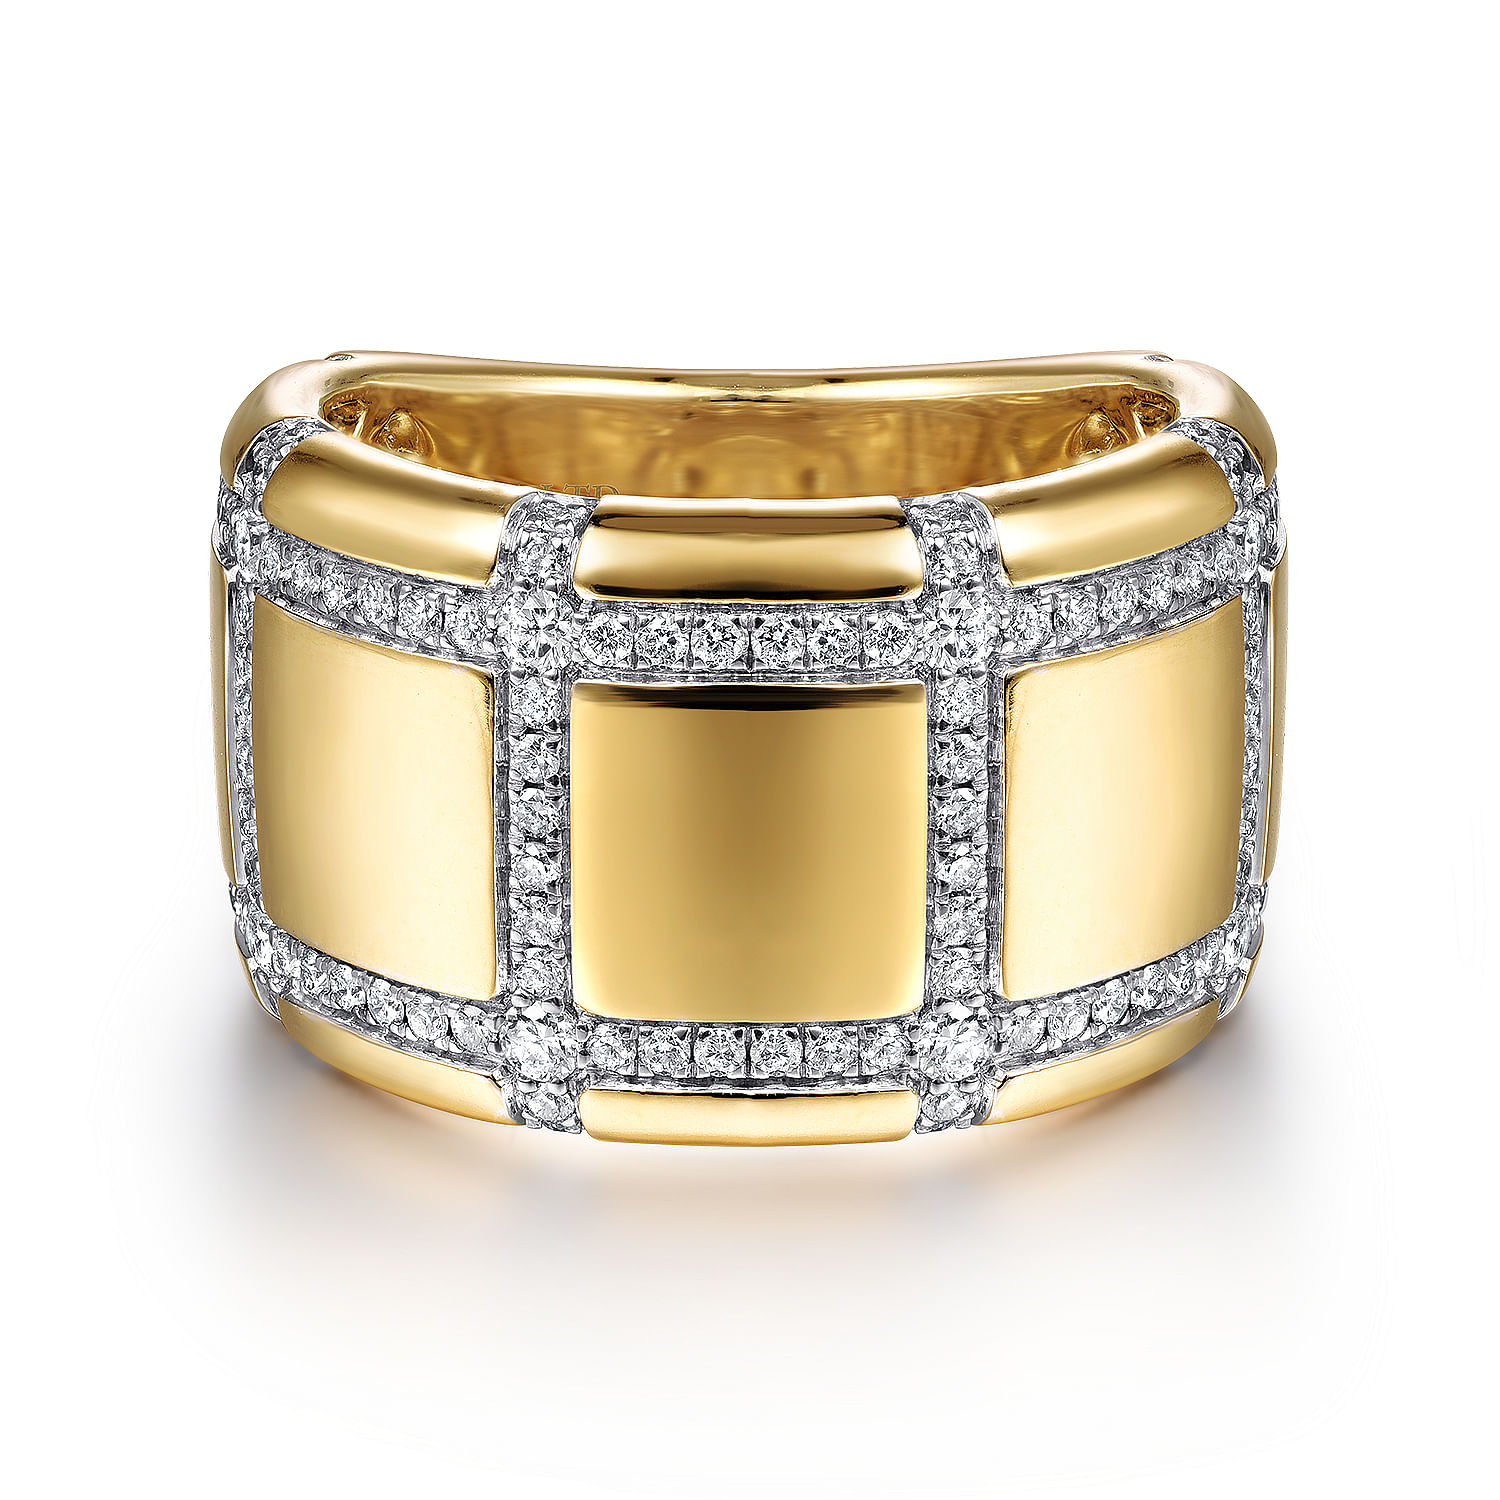 18K Yellow Gold Wide Band Ring with Checkered Diamond Pattern